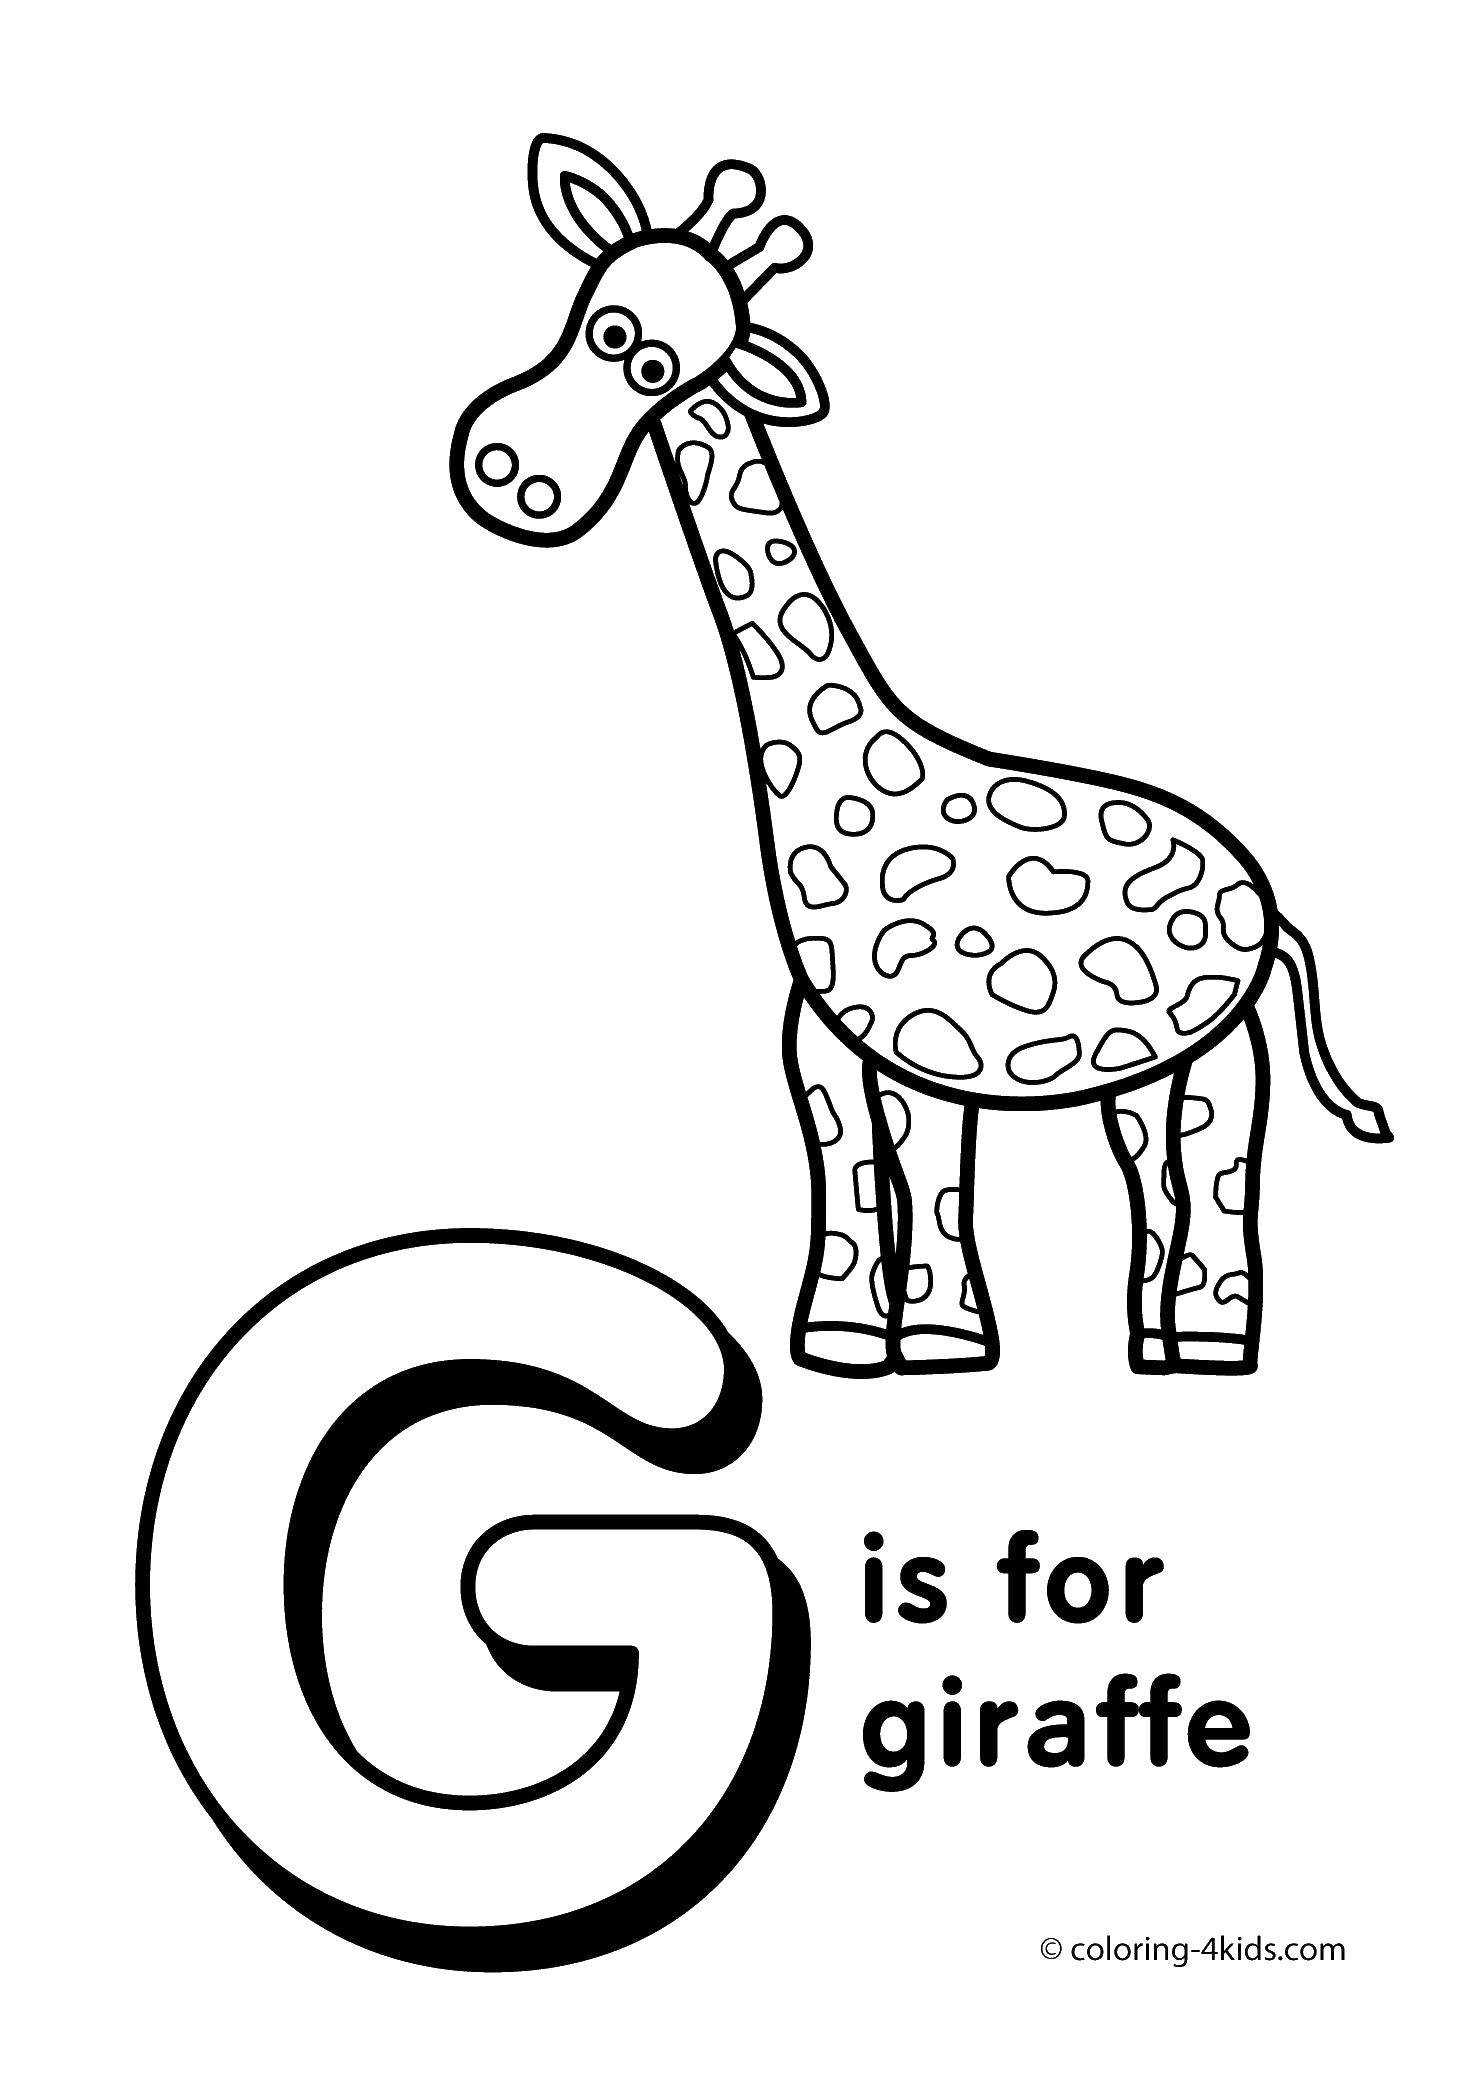 Coloring The giraffe and the letter. Category animals. Tags:  giraffe, neck, letter.